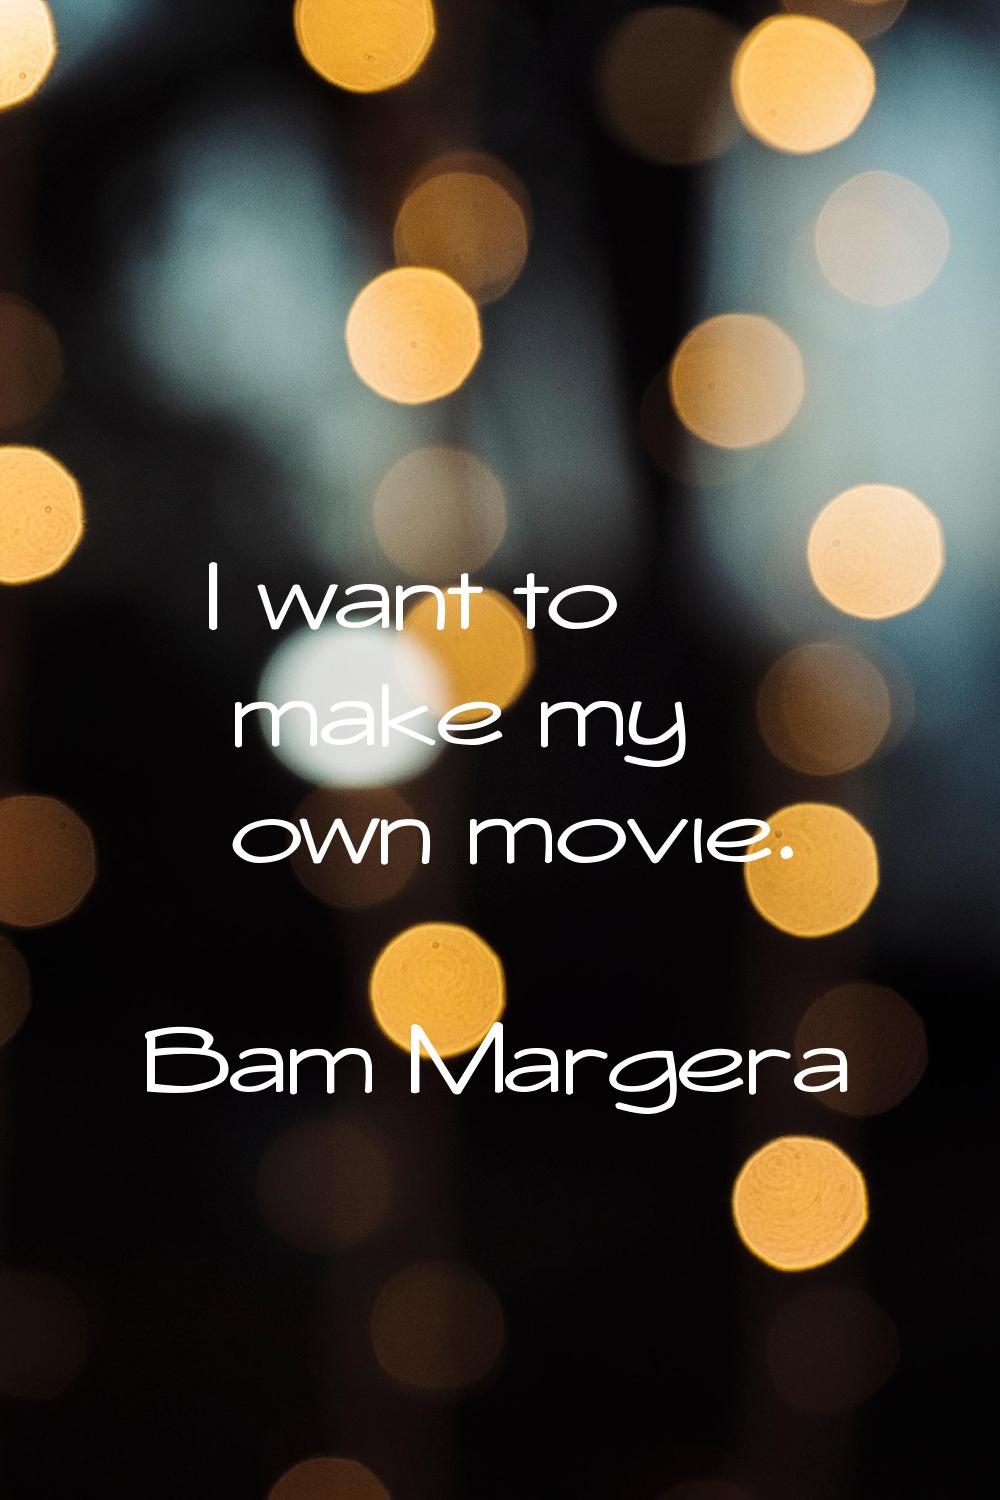 I want to make my own movie.